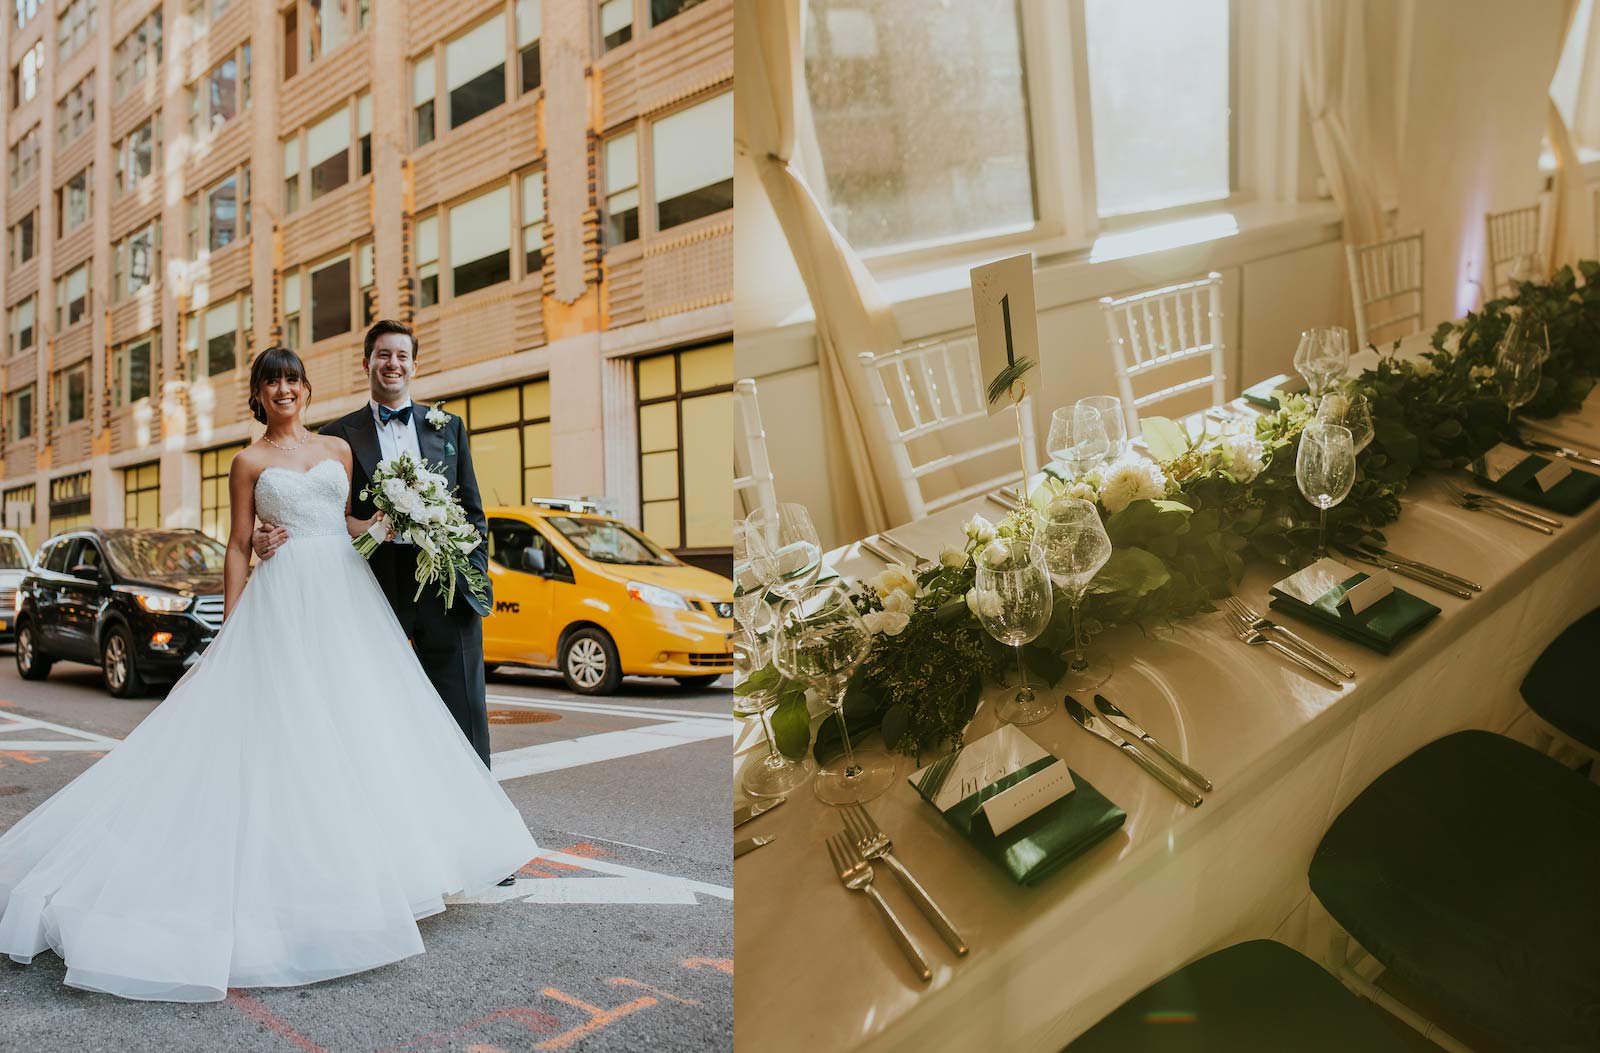 Simon and Olesia's posing in NYC street and their table setting at The Midtown Loft and Terrace in NYC